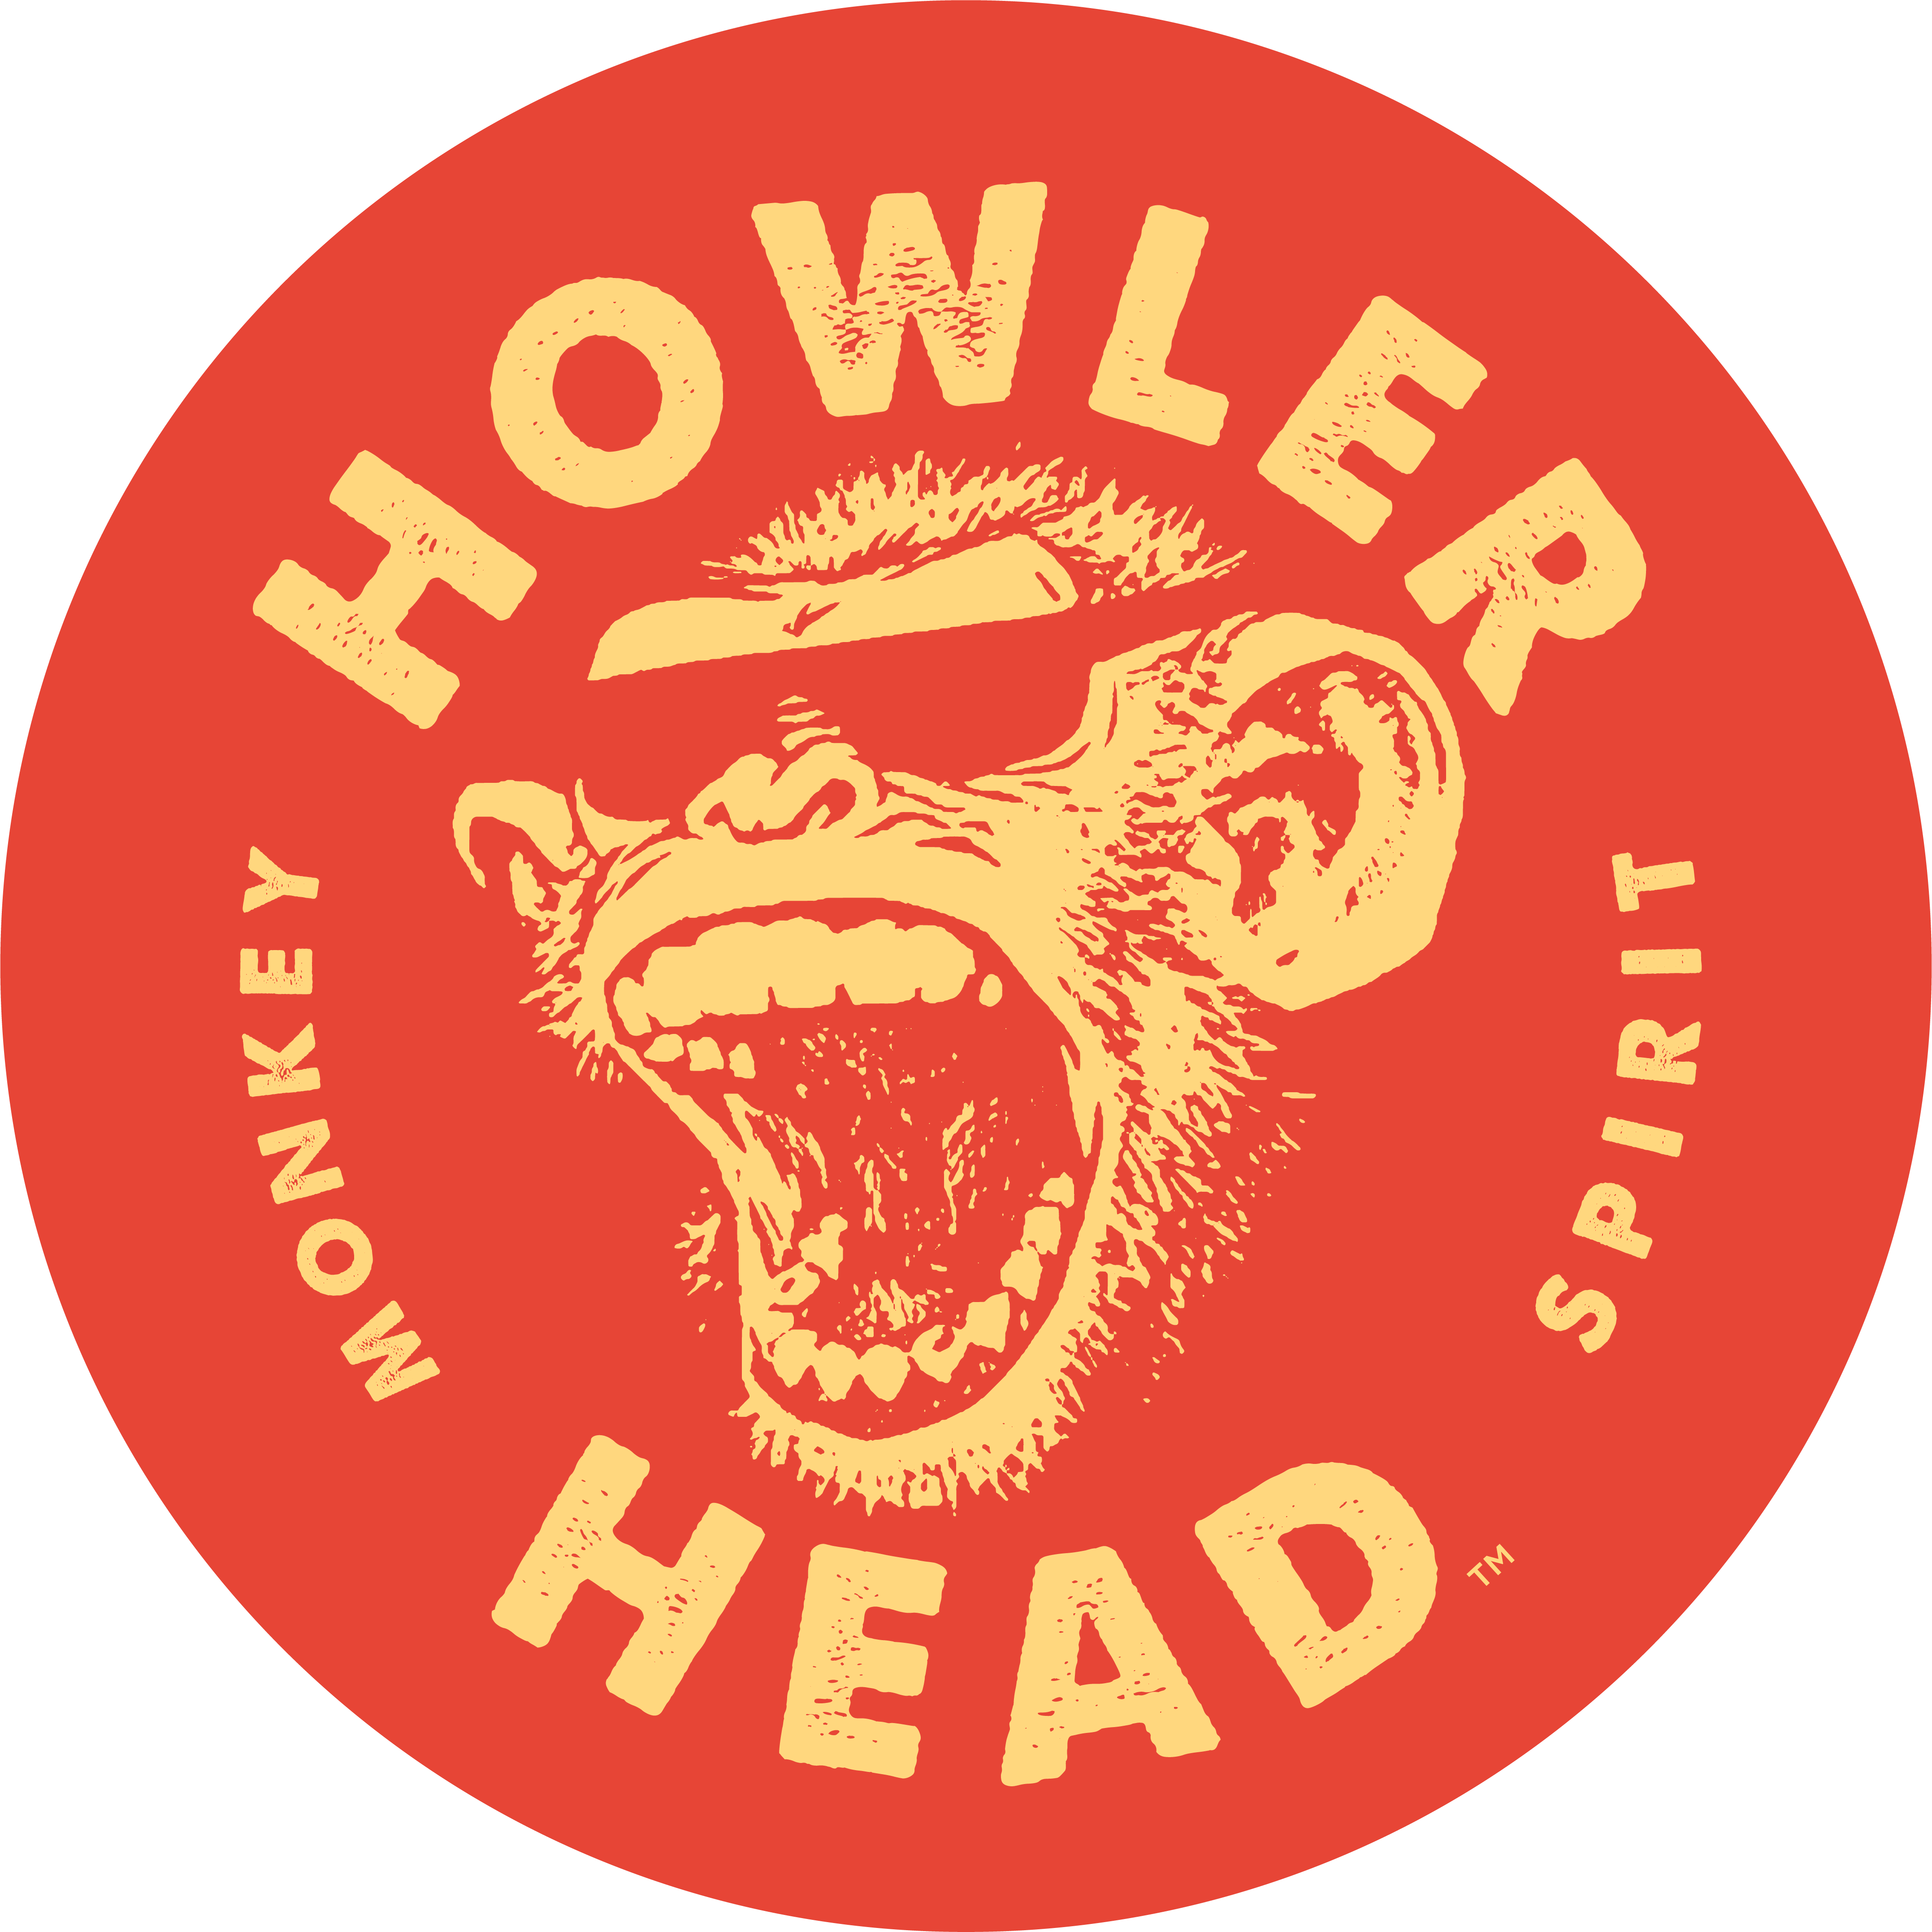 Howler Head Expands Distribution to Brazil and Australia